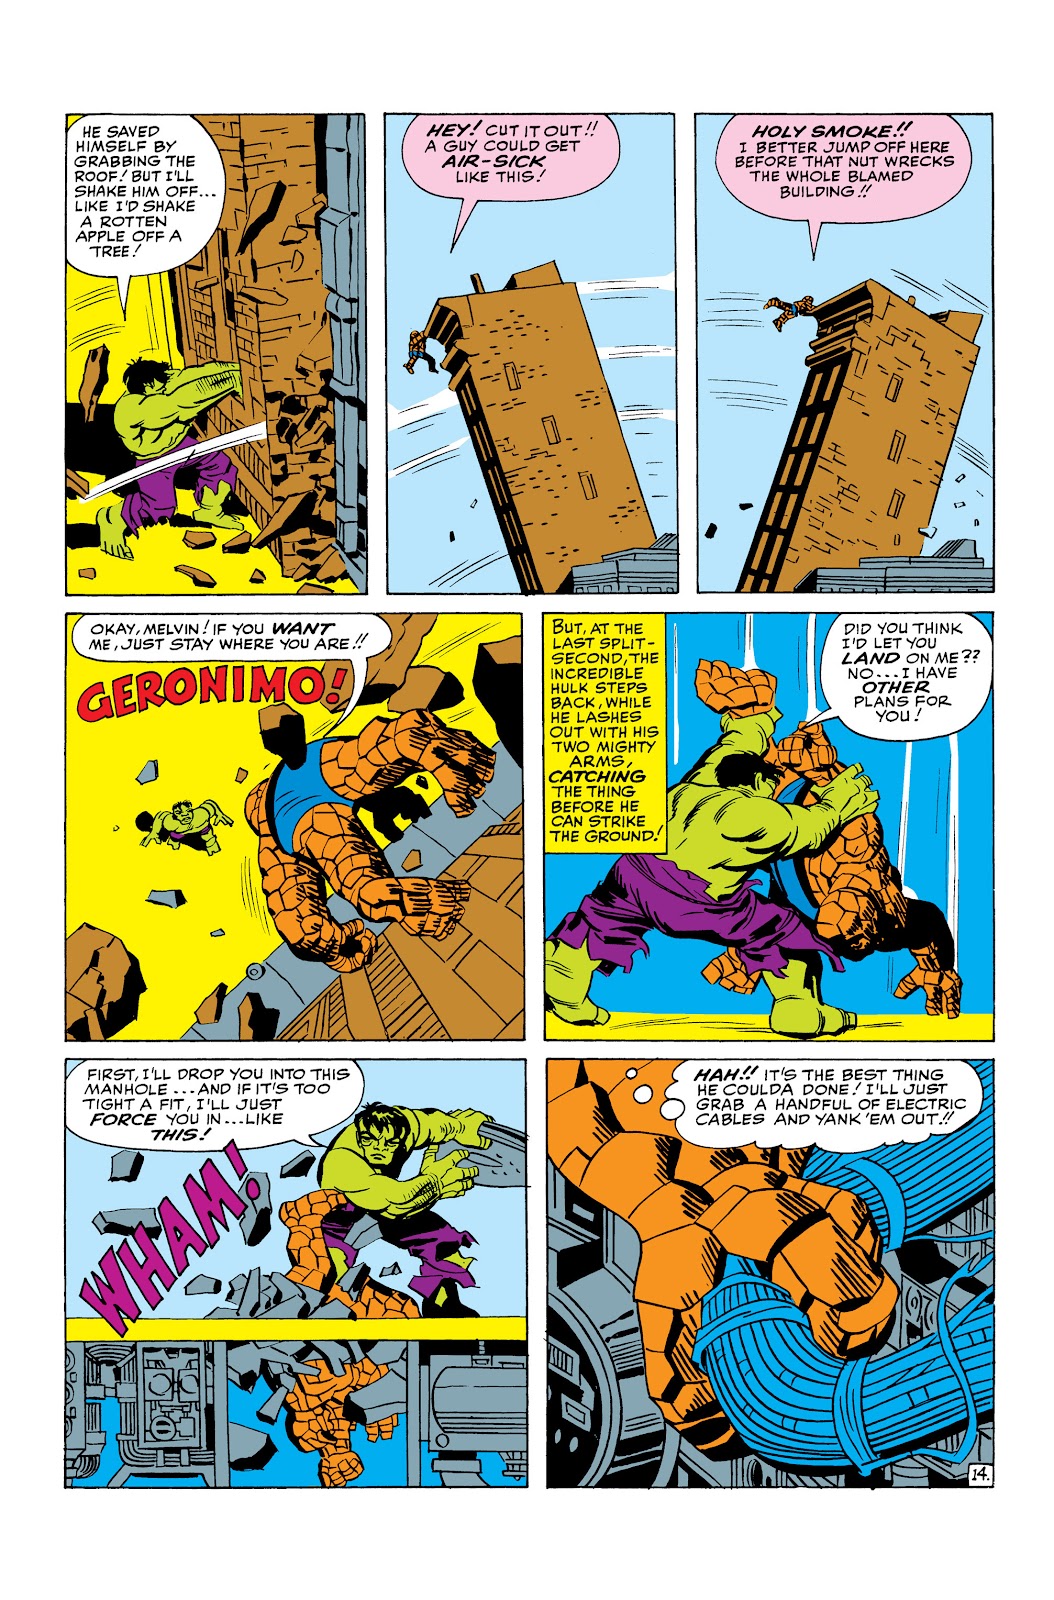 Read online Marvel Masterworks: The Fantastic Four comic - Issue # TPB 3 (Part 2) - 11